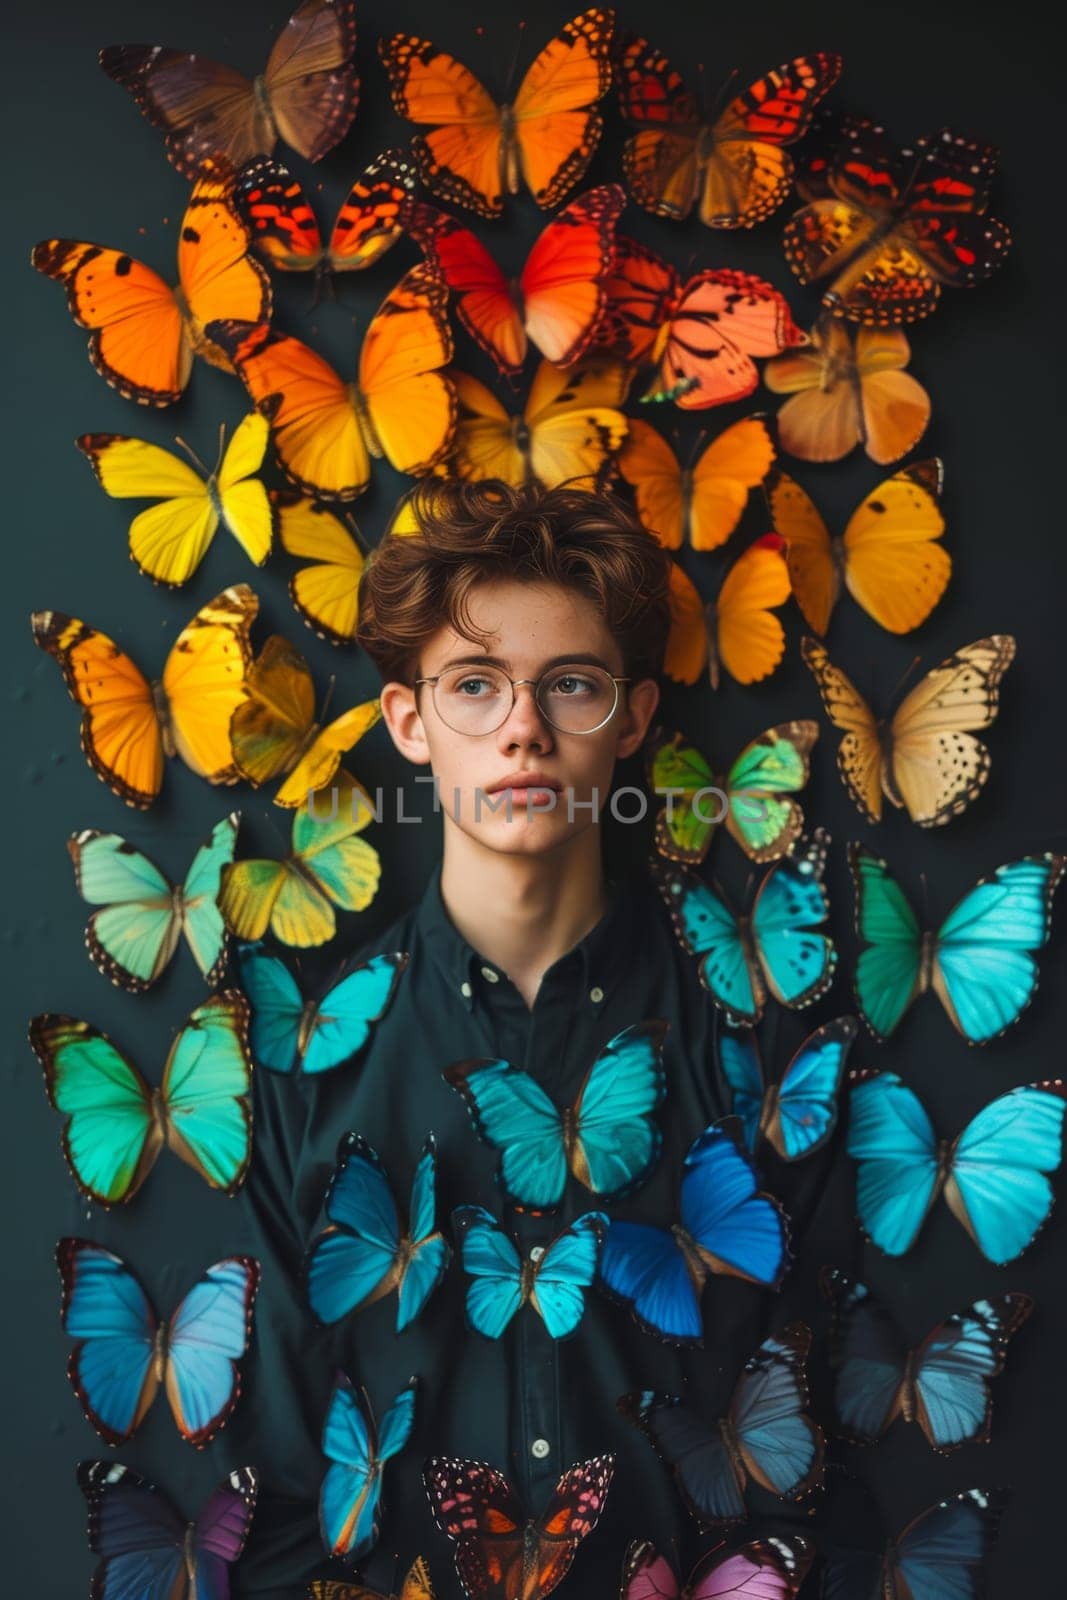 A boy on a background of colorful butterflies. textured background. 3d illustration.